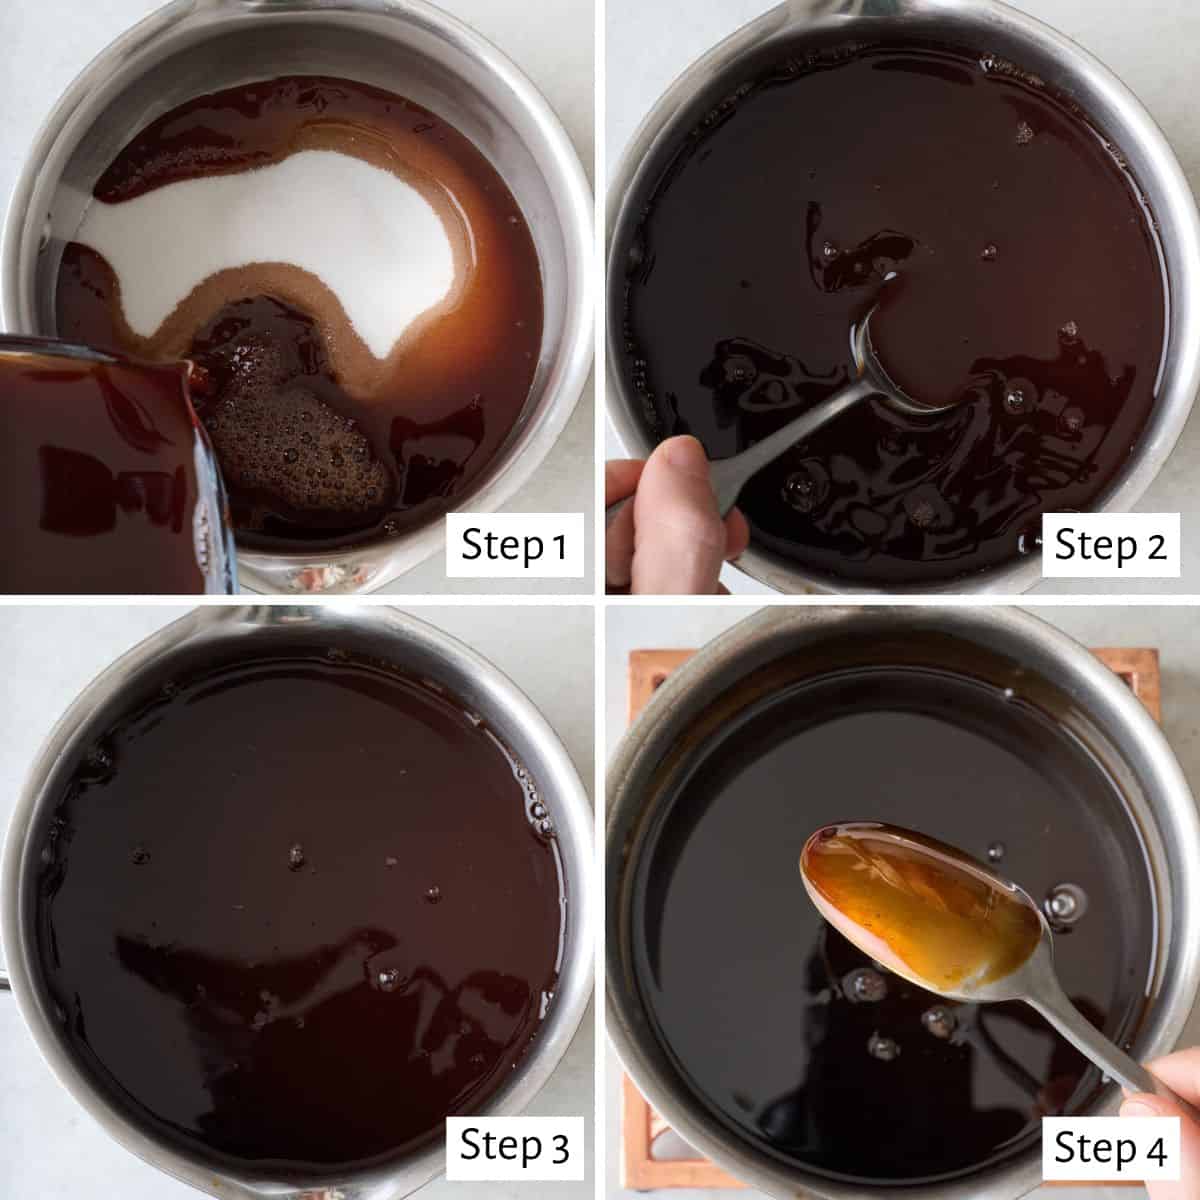 4 image collage making the recipe in a pot: 1- sugar in the pot with pomegranate juice being poured in, 2- stirring together, 3- after the sugar is dissolved, 4- after thickening into a molasses-type syrup.